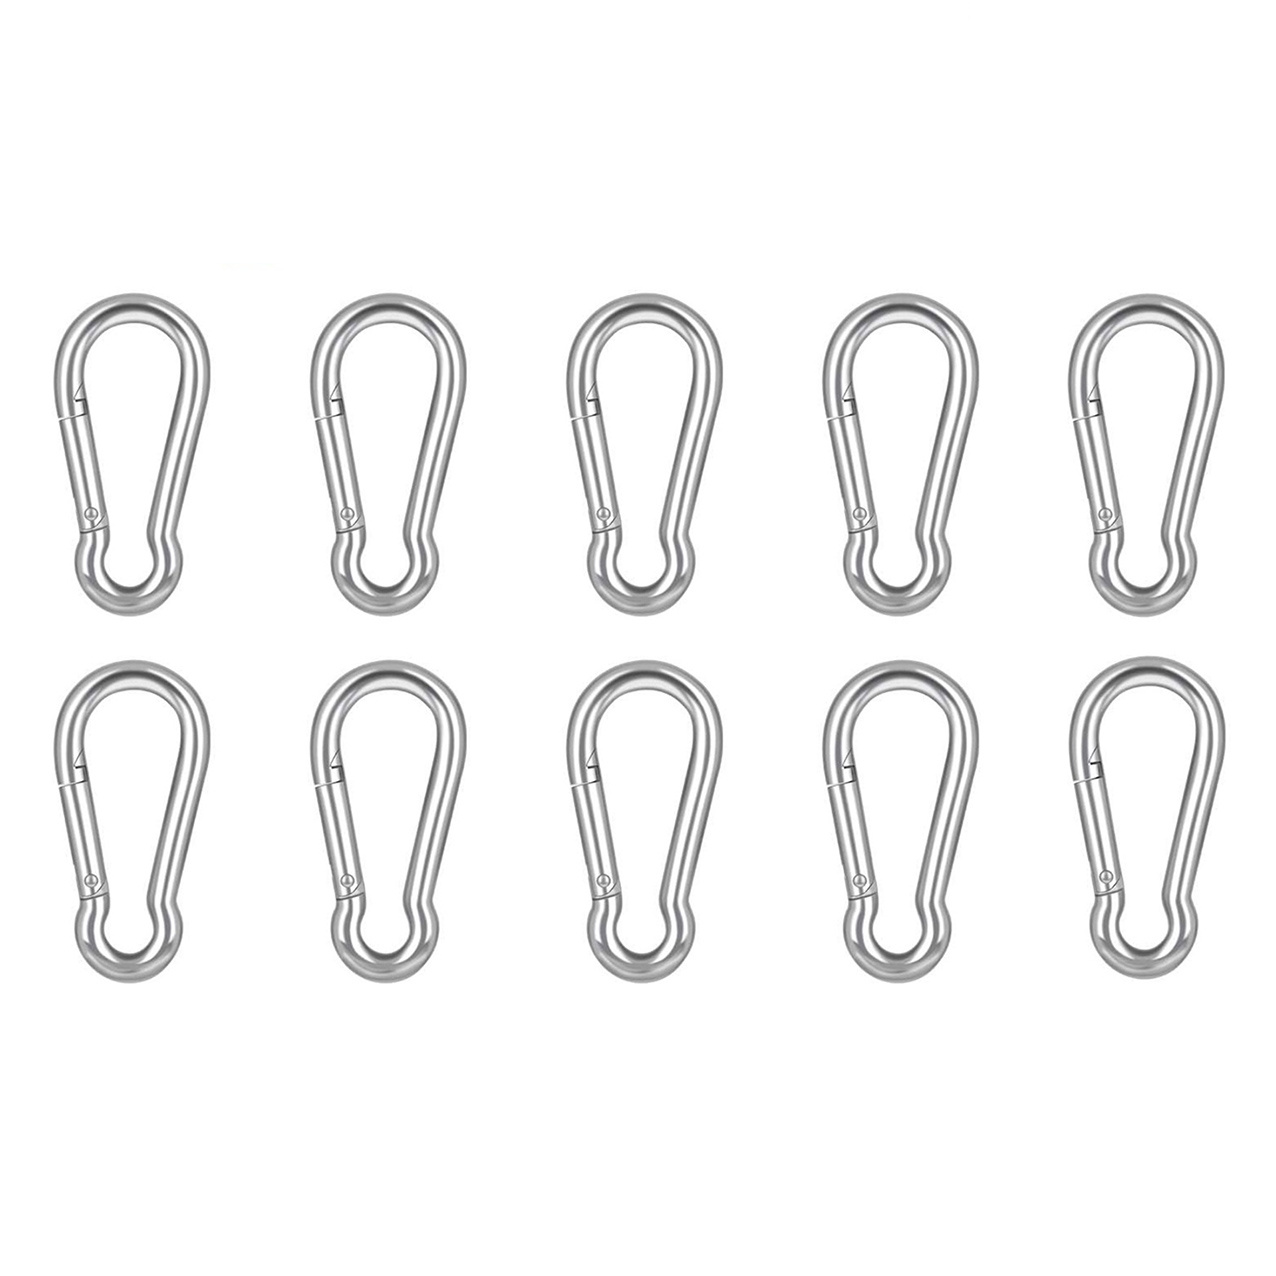 2/10pcs Stainless Steel Carabiner Clip Spring-Snap Hook - Lotsun Heavy Duty  Carabiner Clips For Keys Swing Set Camping Fishing Hiking Traveling